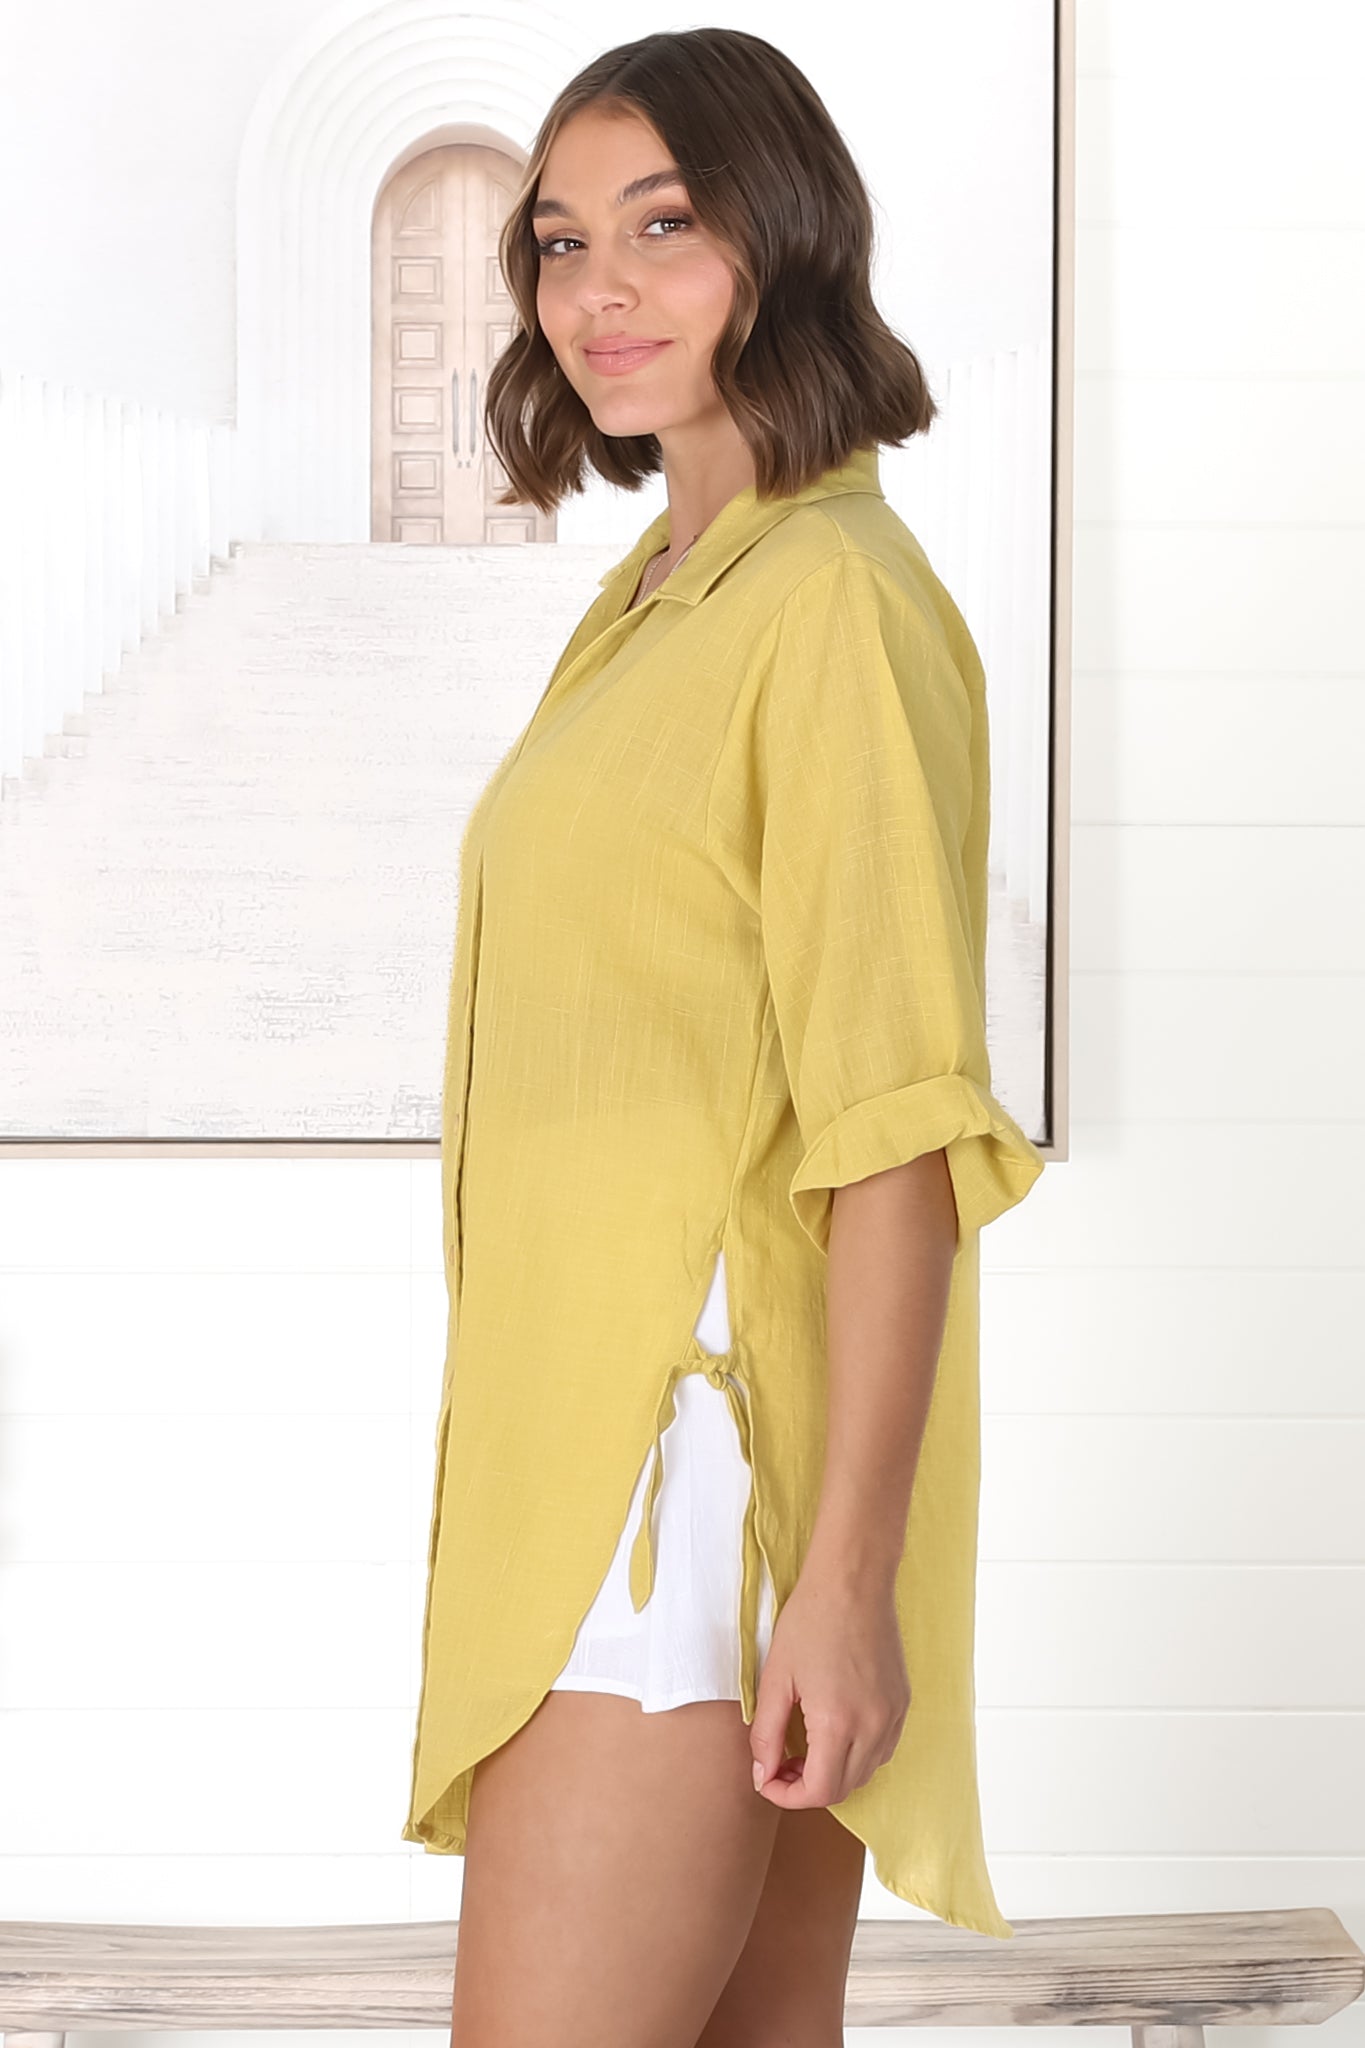 Beachly Shirt - Folded Collar Button Down Relaxed Shirt In Mustard